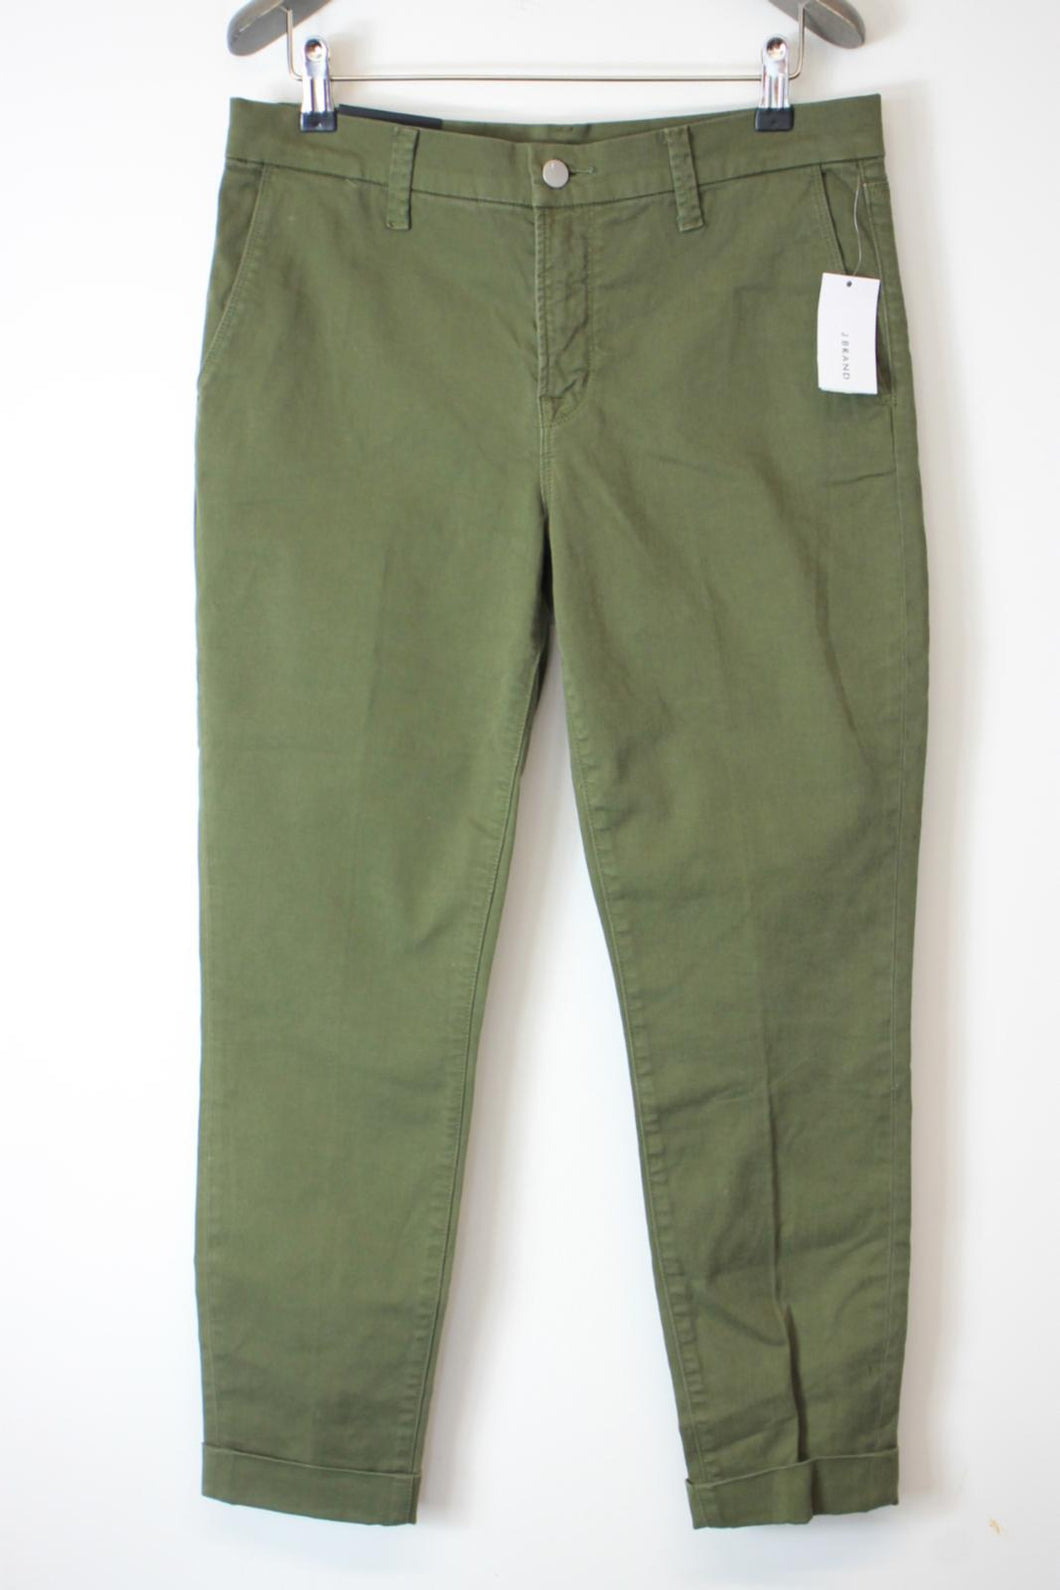 J BRAND Ladies Green Cotton Jose High Rise Tapered Skinny Trousers Size 27 BNWT